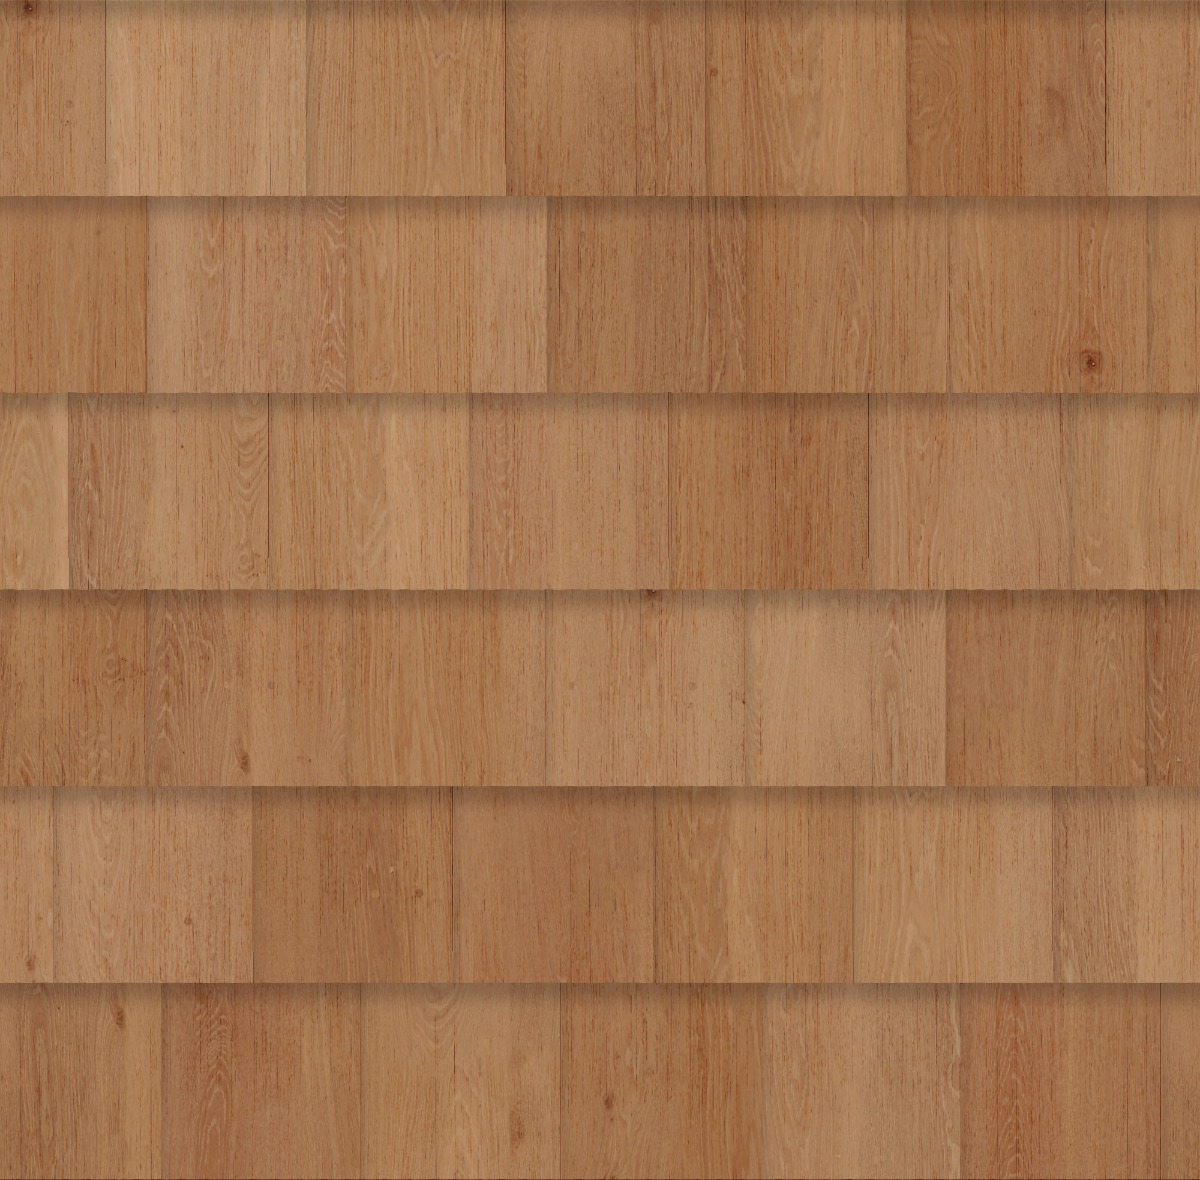 A seamless wood texture with western red cedar boards arranged in a Staggered pattern